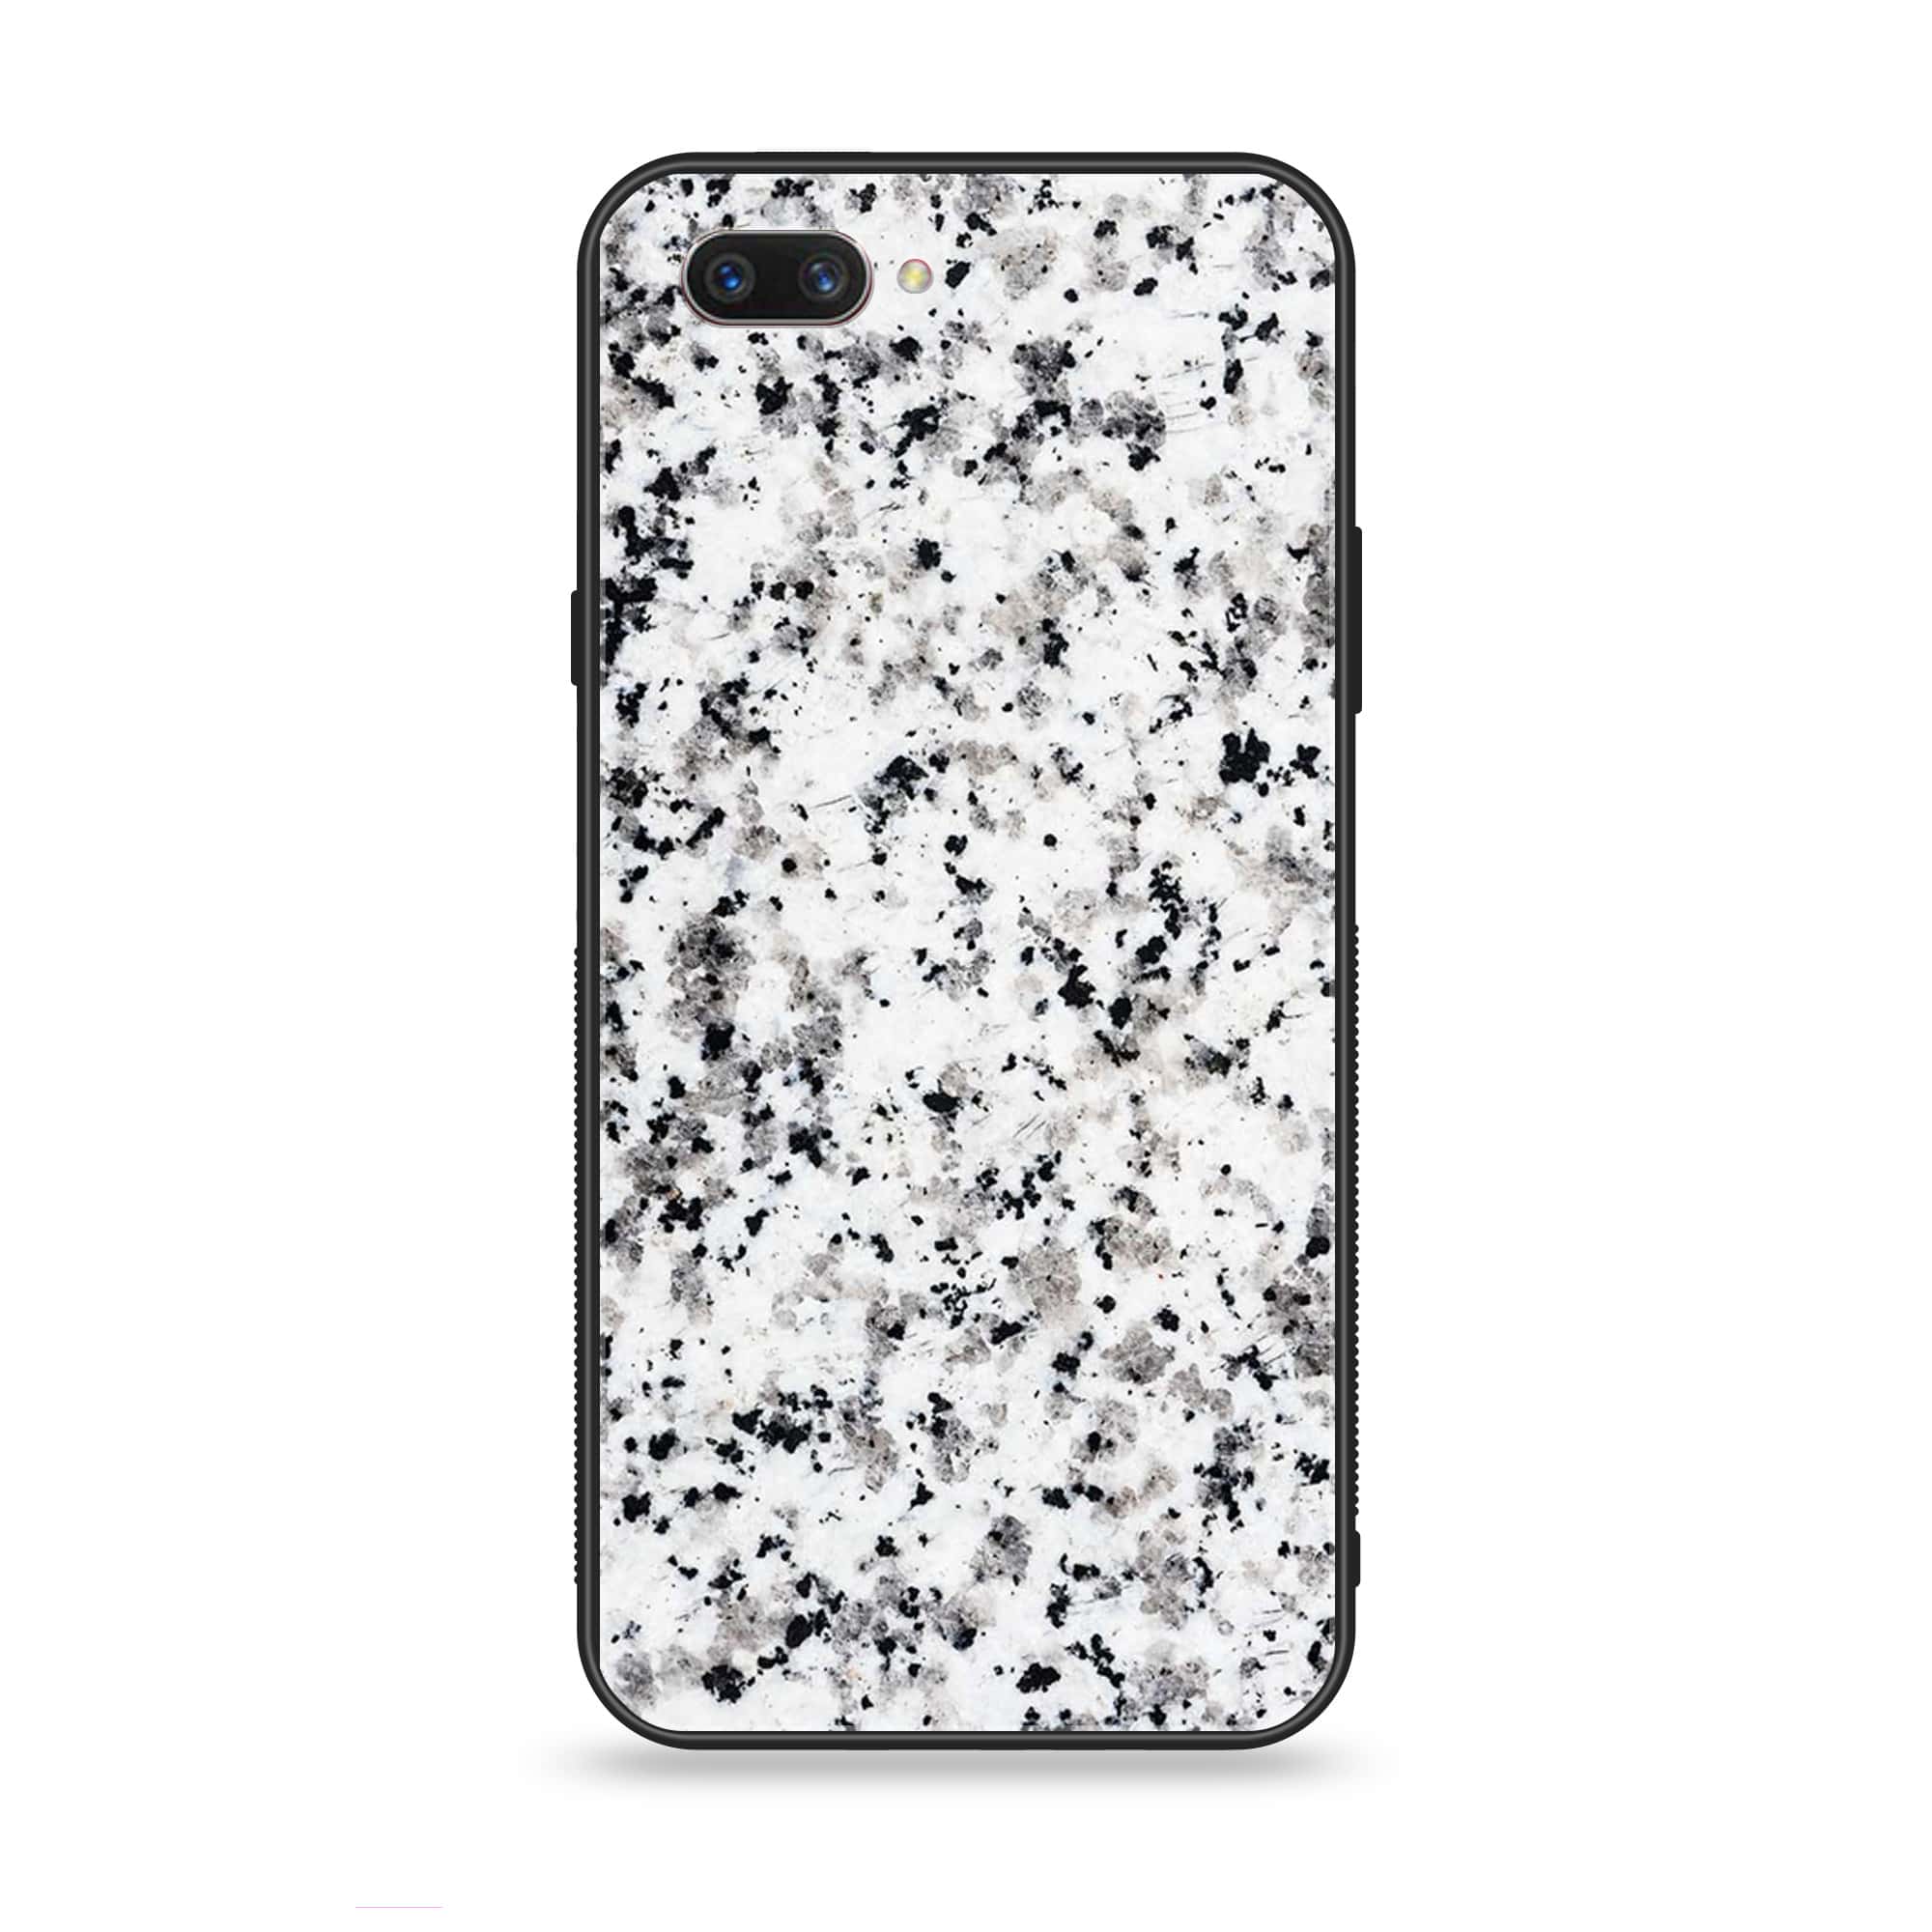 Oppo A3s - White Marble series - Premium Printed Glass soft Bumper shock Proof Case